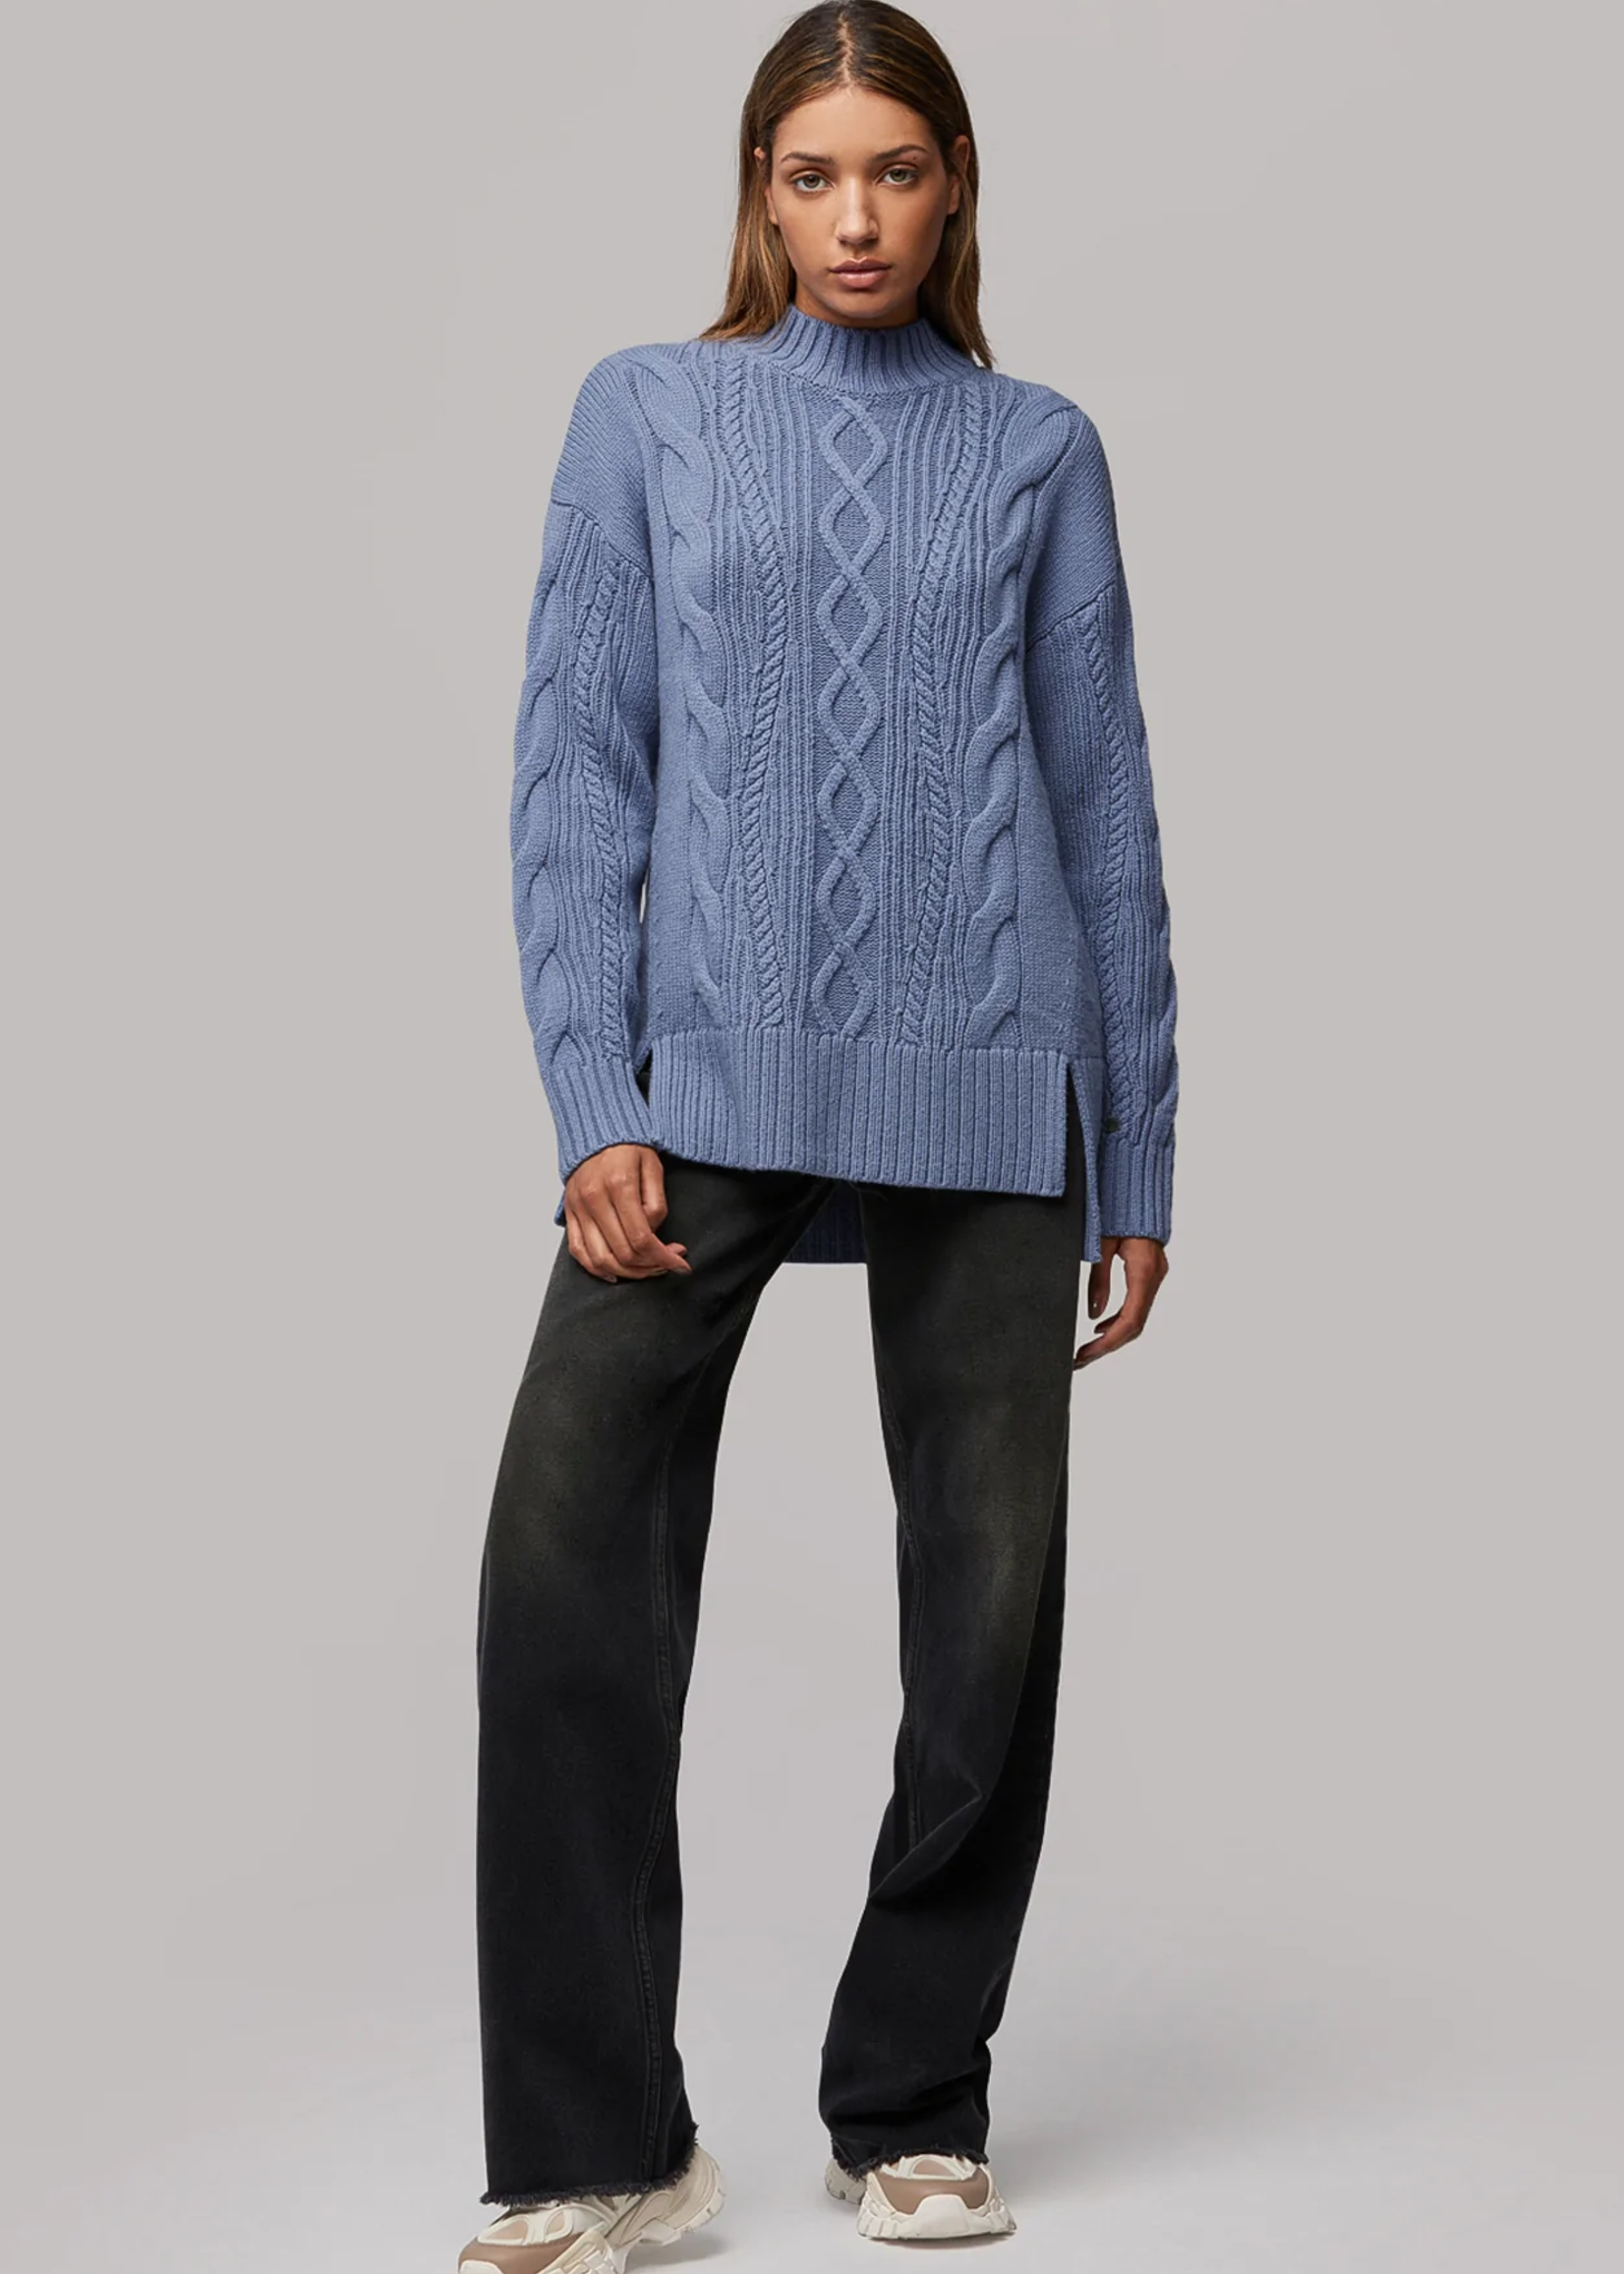 Soia & Kyo Chelsea Cable Knit Sweater